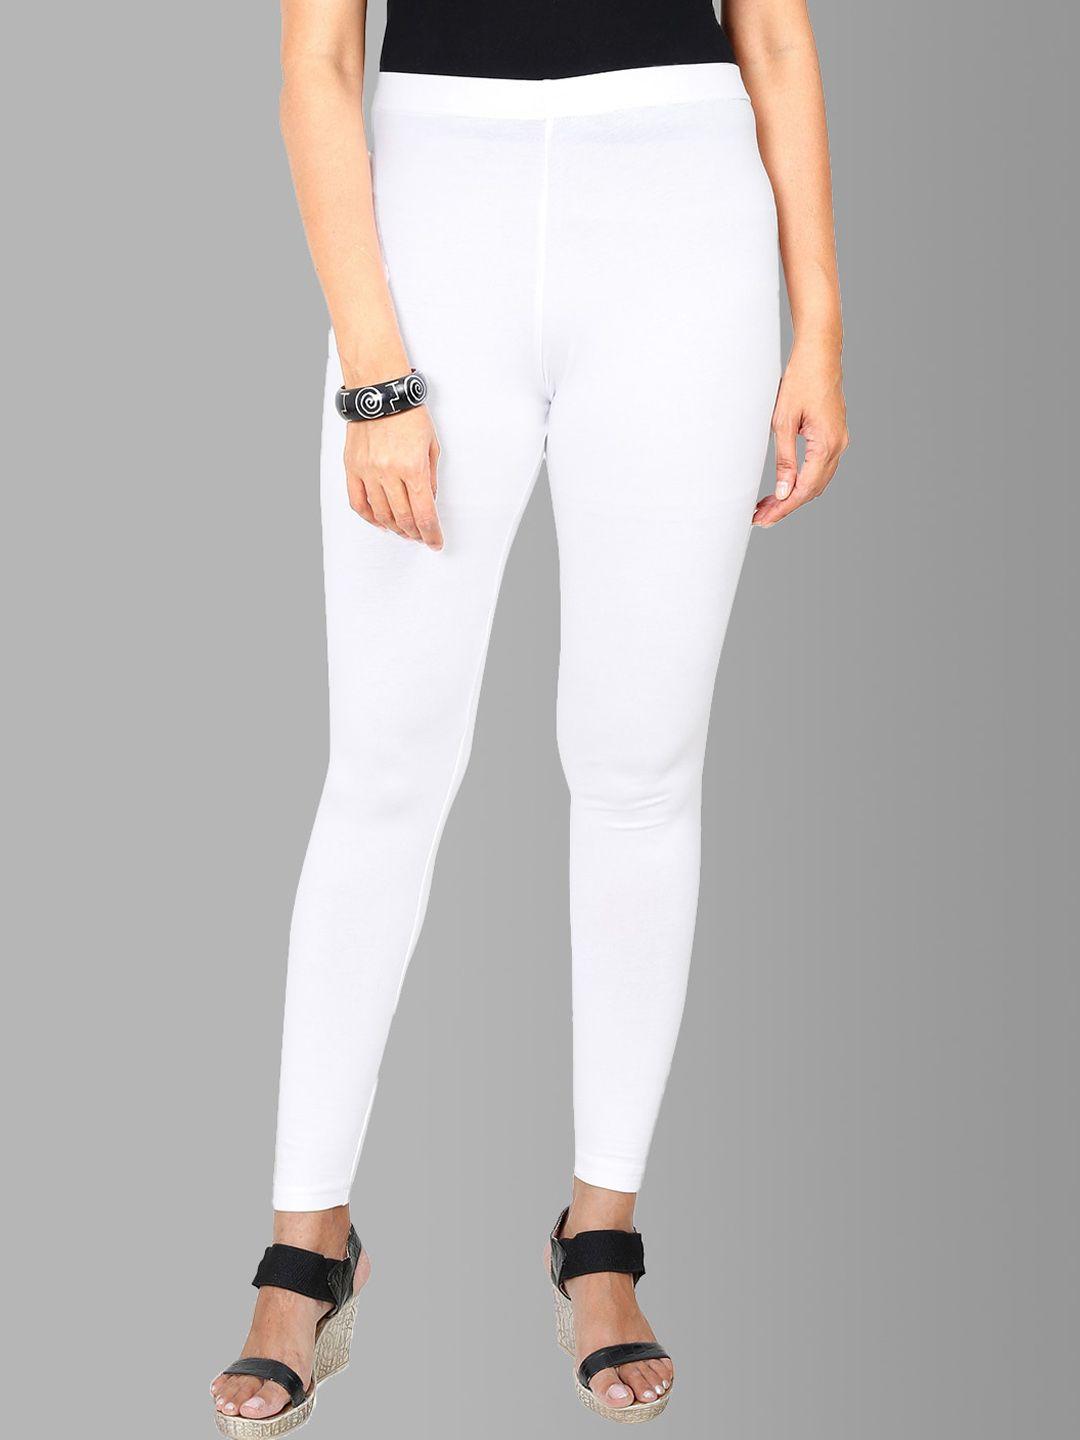 feather soft elite women white solid cotton ankle length leggings